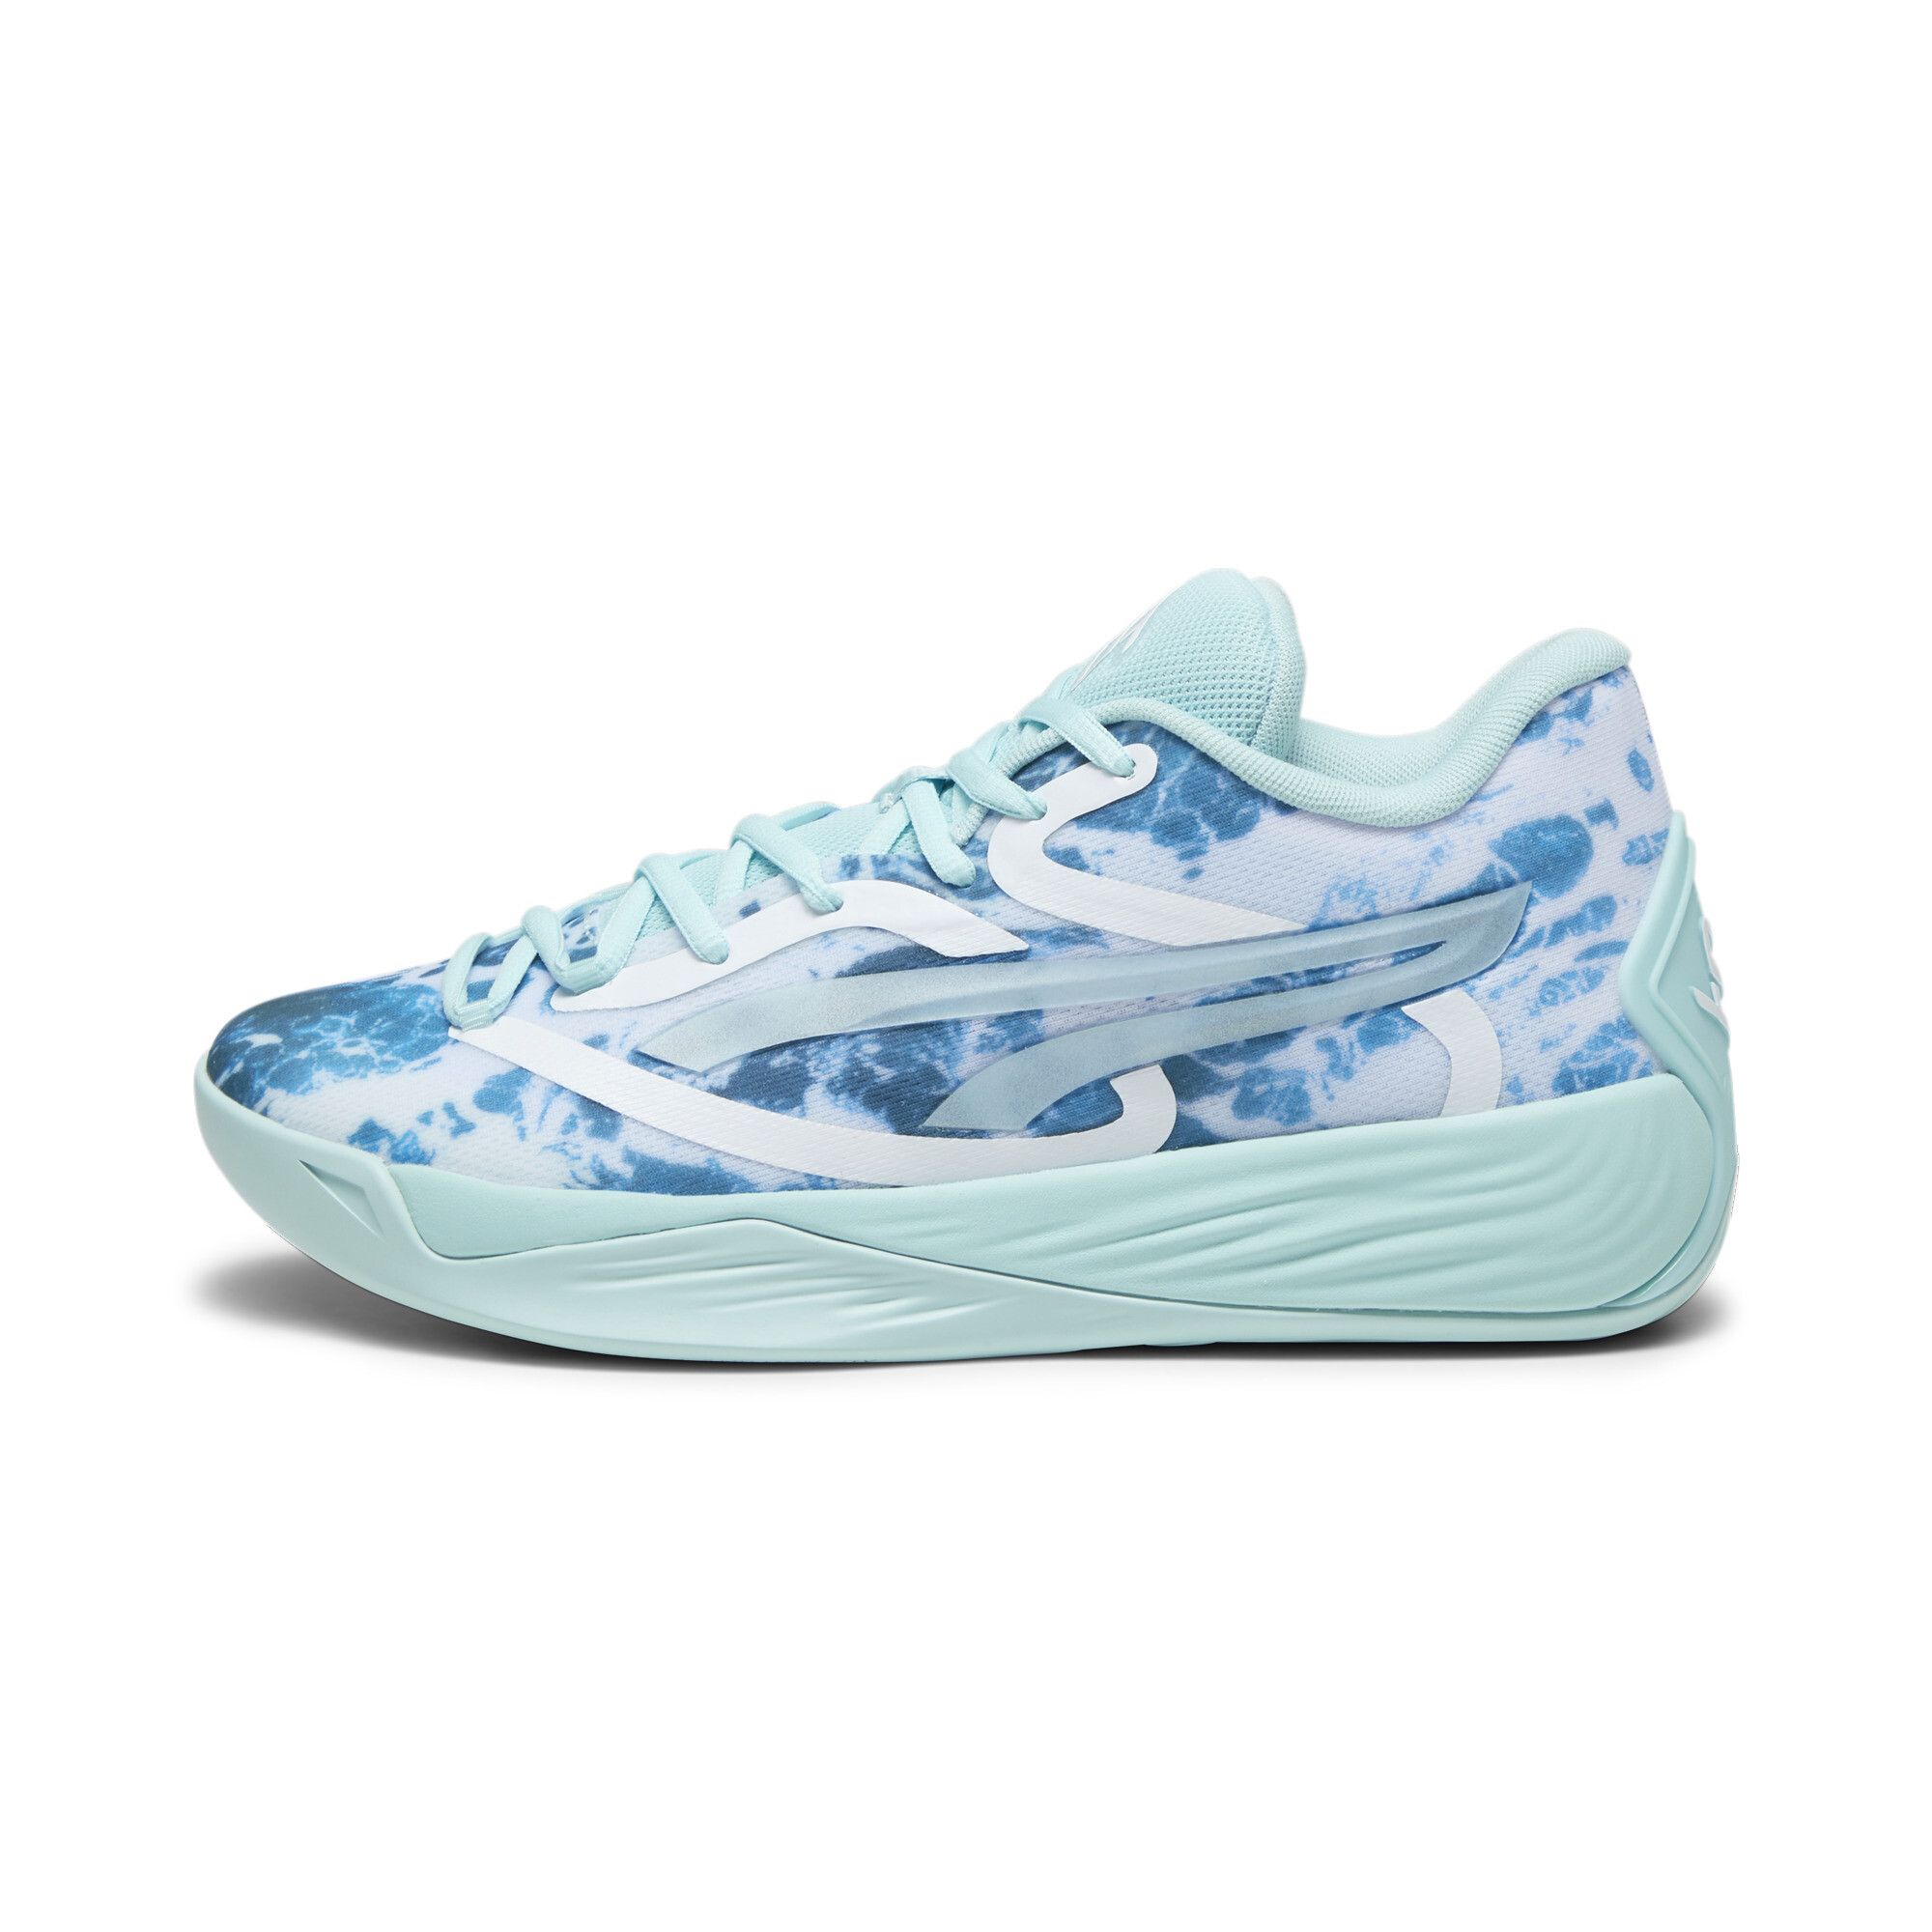 Women's Puma Stewie 2 Water's Basketball Shoes, Blue, Size 46.5, Shoes